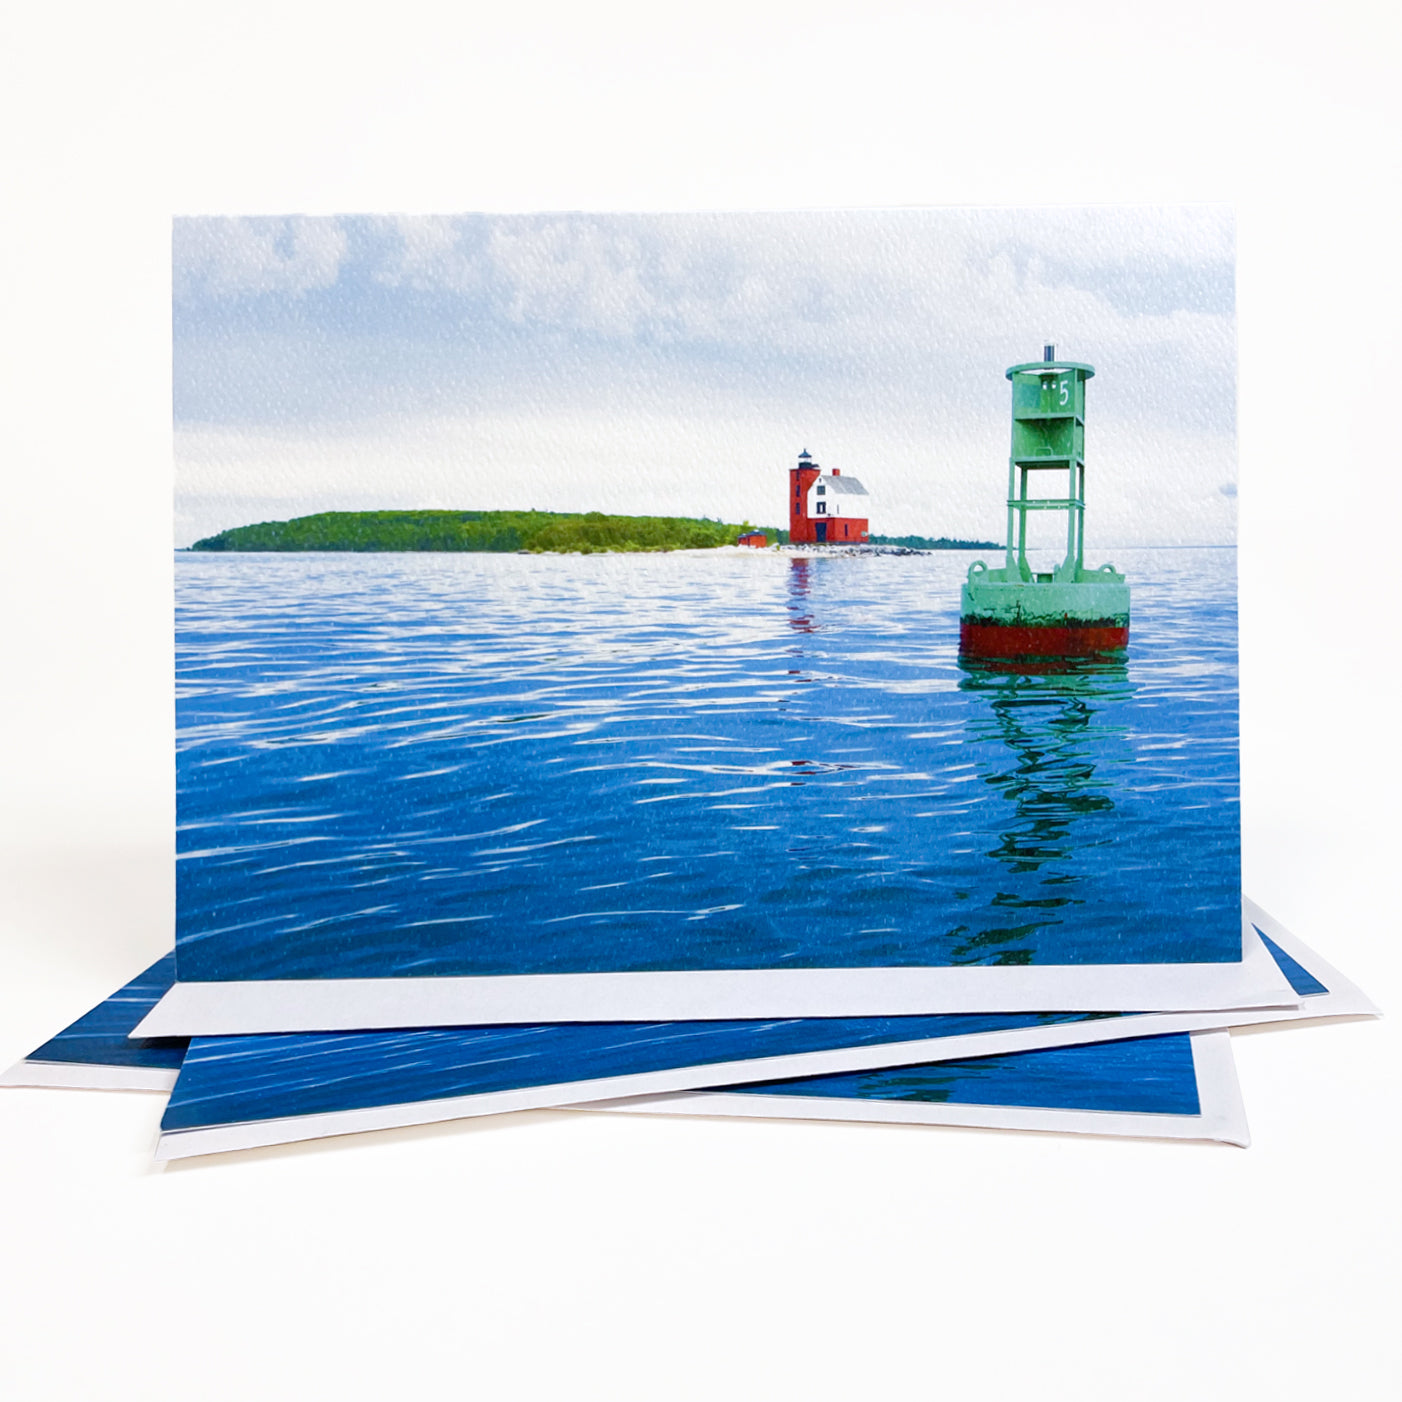 Blank greeting card featuring a photograph of the Round Island Lighthouse near Mackinac Island, Michigan, by local artist Jennifer Wohletz of Mackinac Memories. 